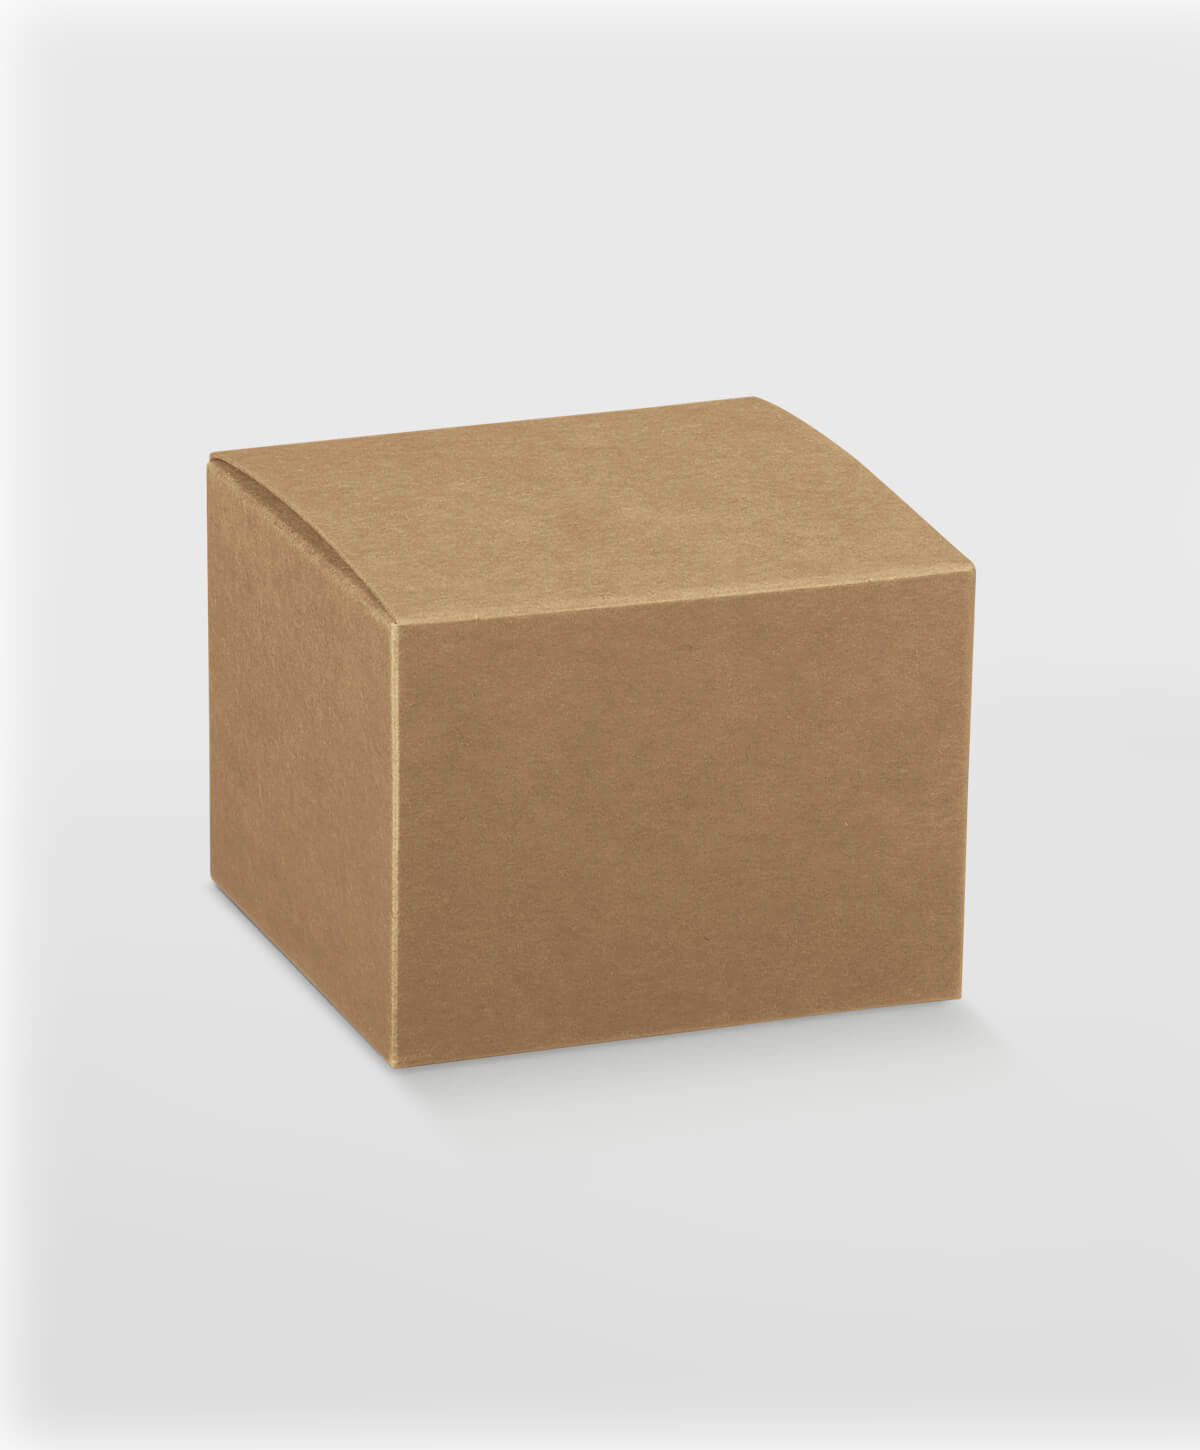 What Are the Different Sizes of  Boxes?